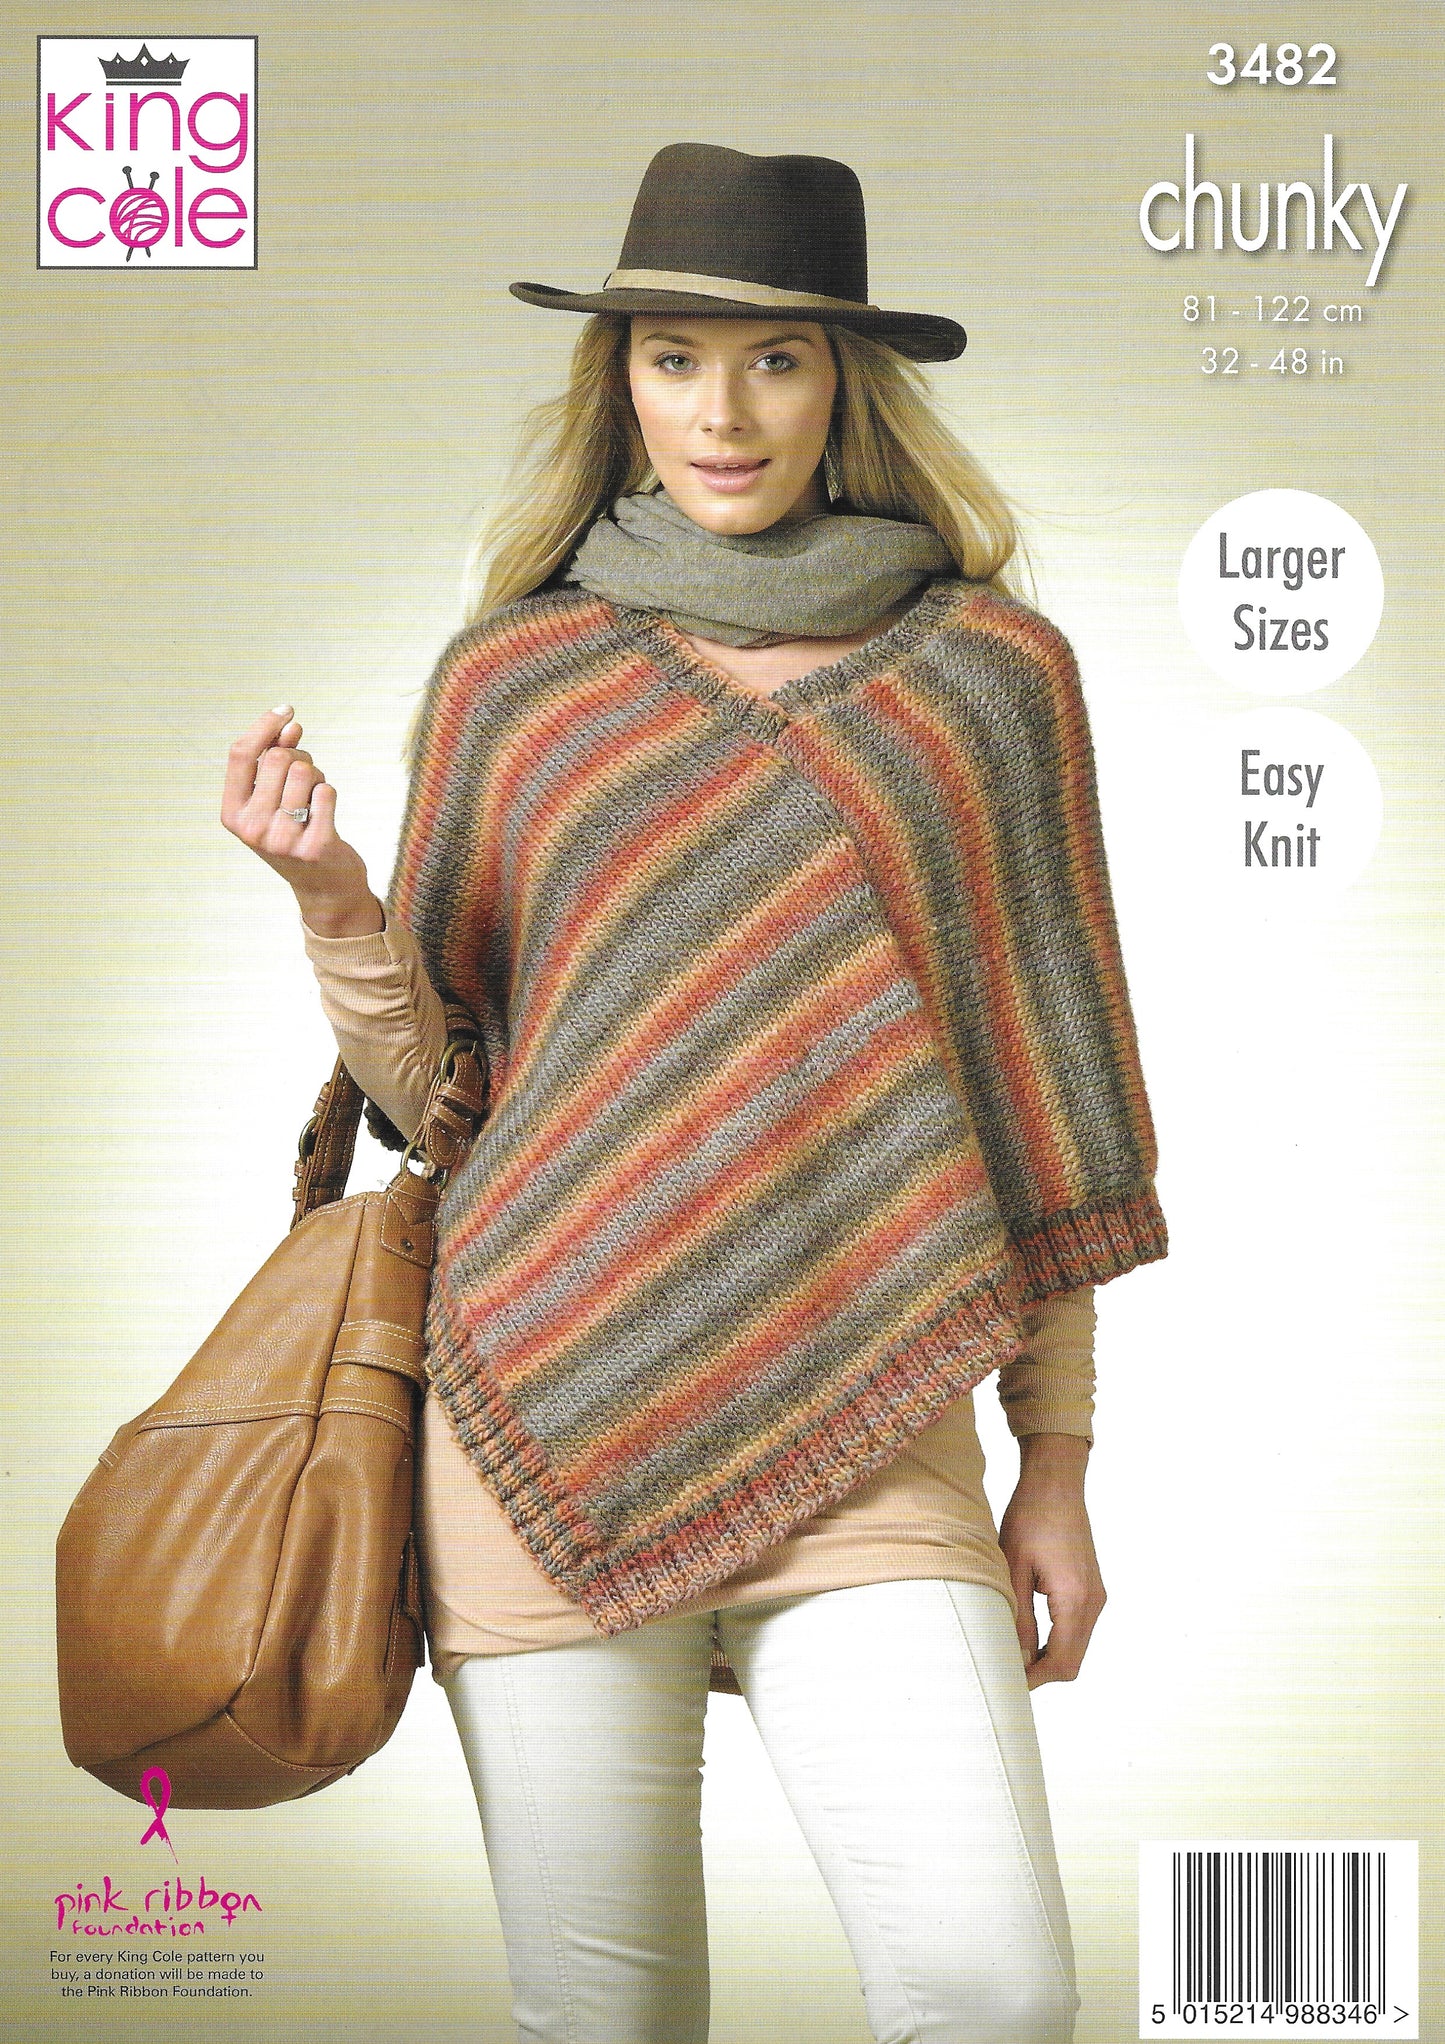 King Cole 3482 Women's Square Poncho and Pointed Poncho, Easy Knit, Larger Sizes, Chunky Knitting Pattern